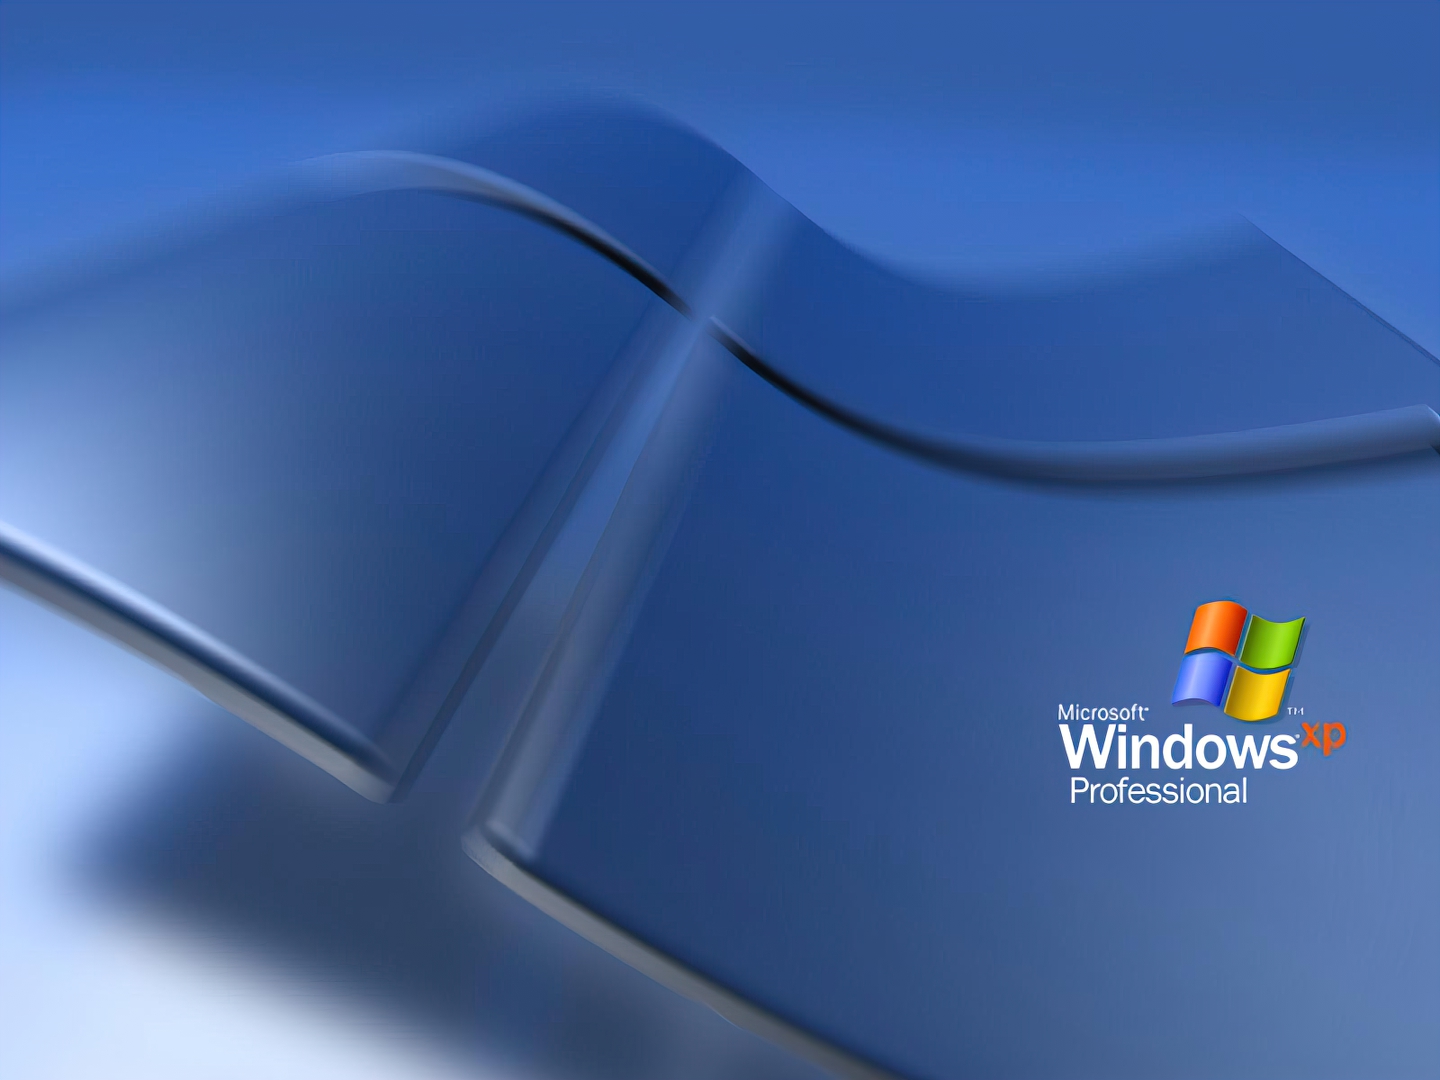 Windows xp professional remastered wallpaper by connor on